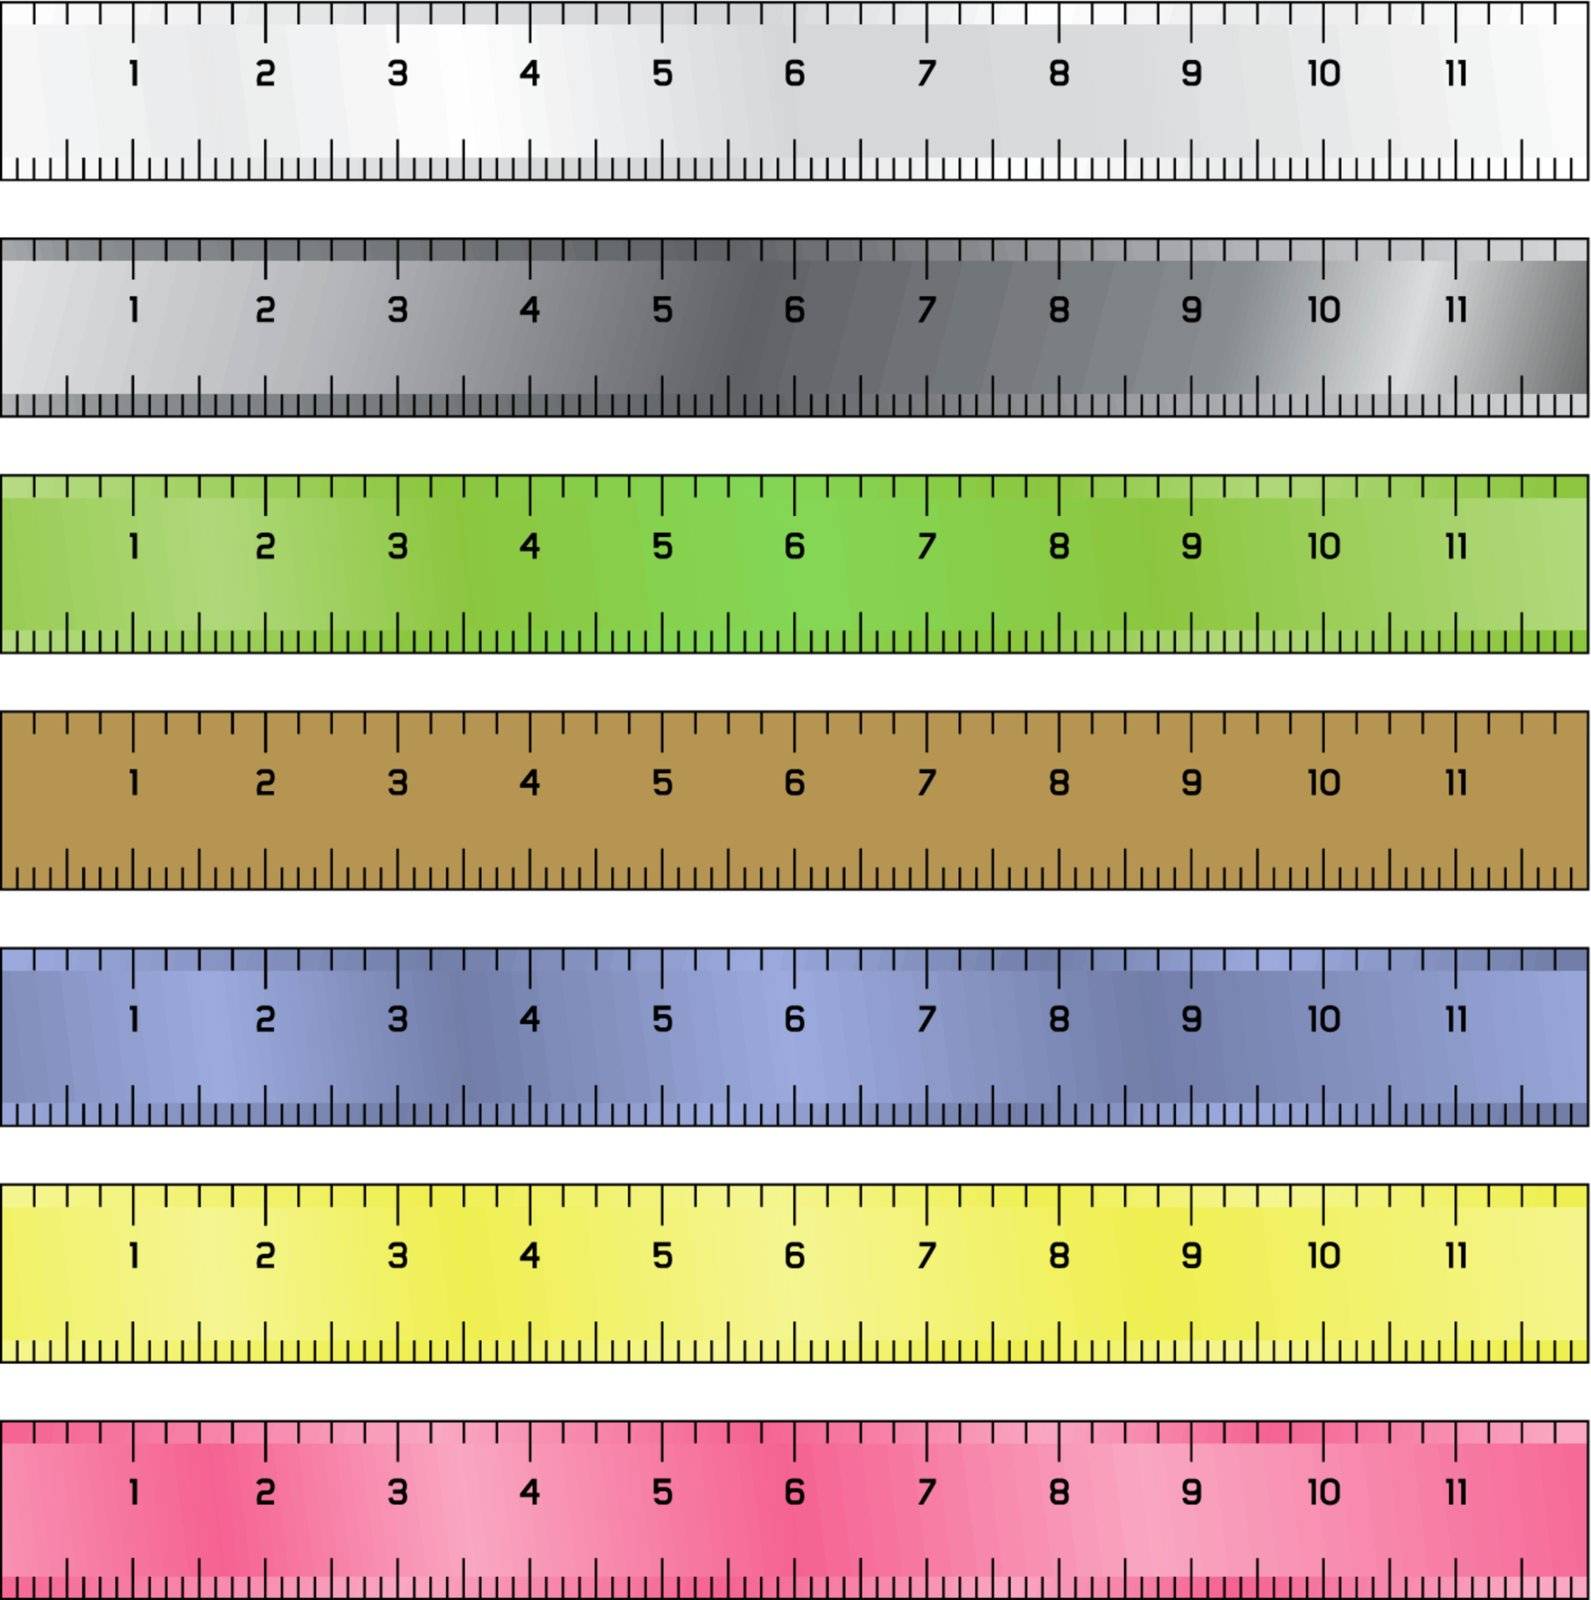 Detailed vector illustration of common measurement rulers

